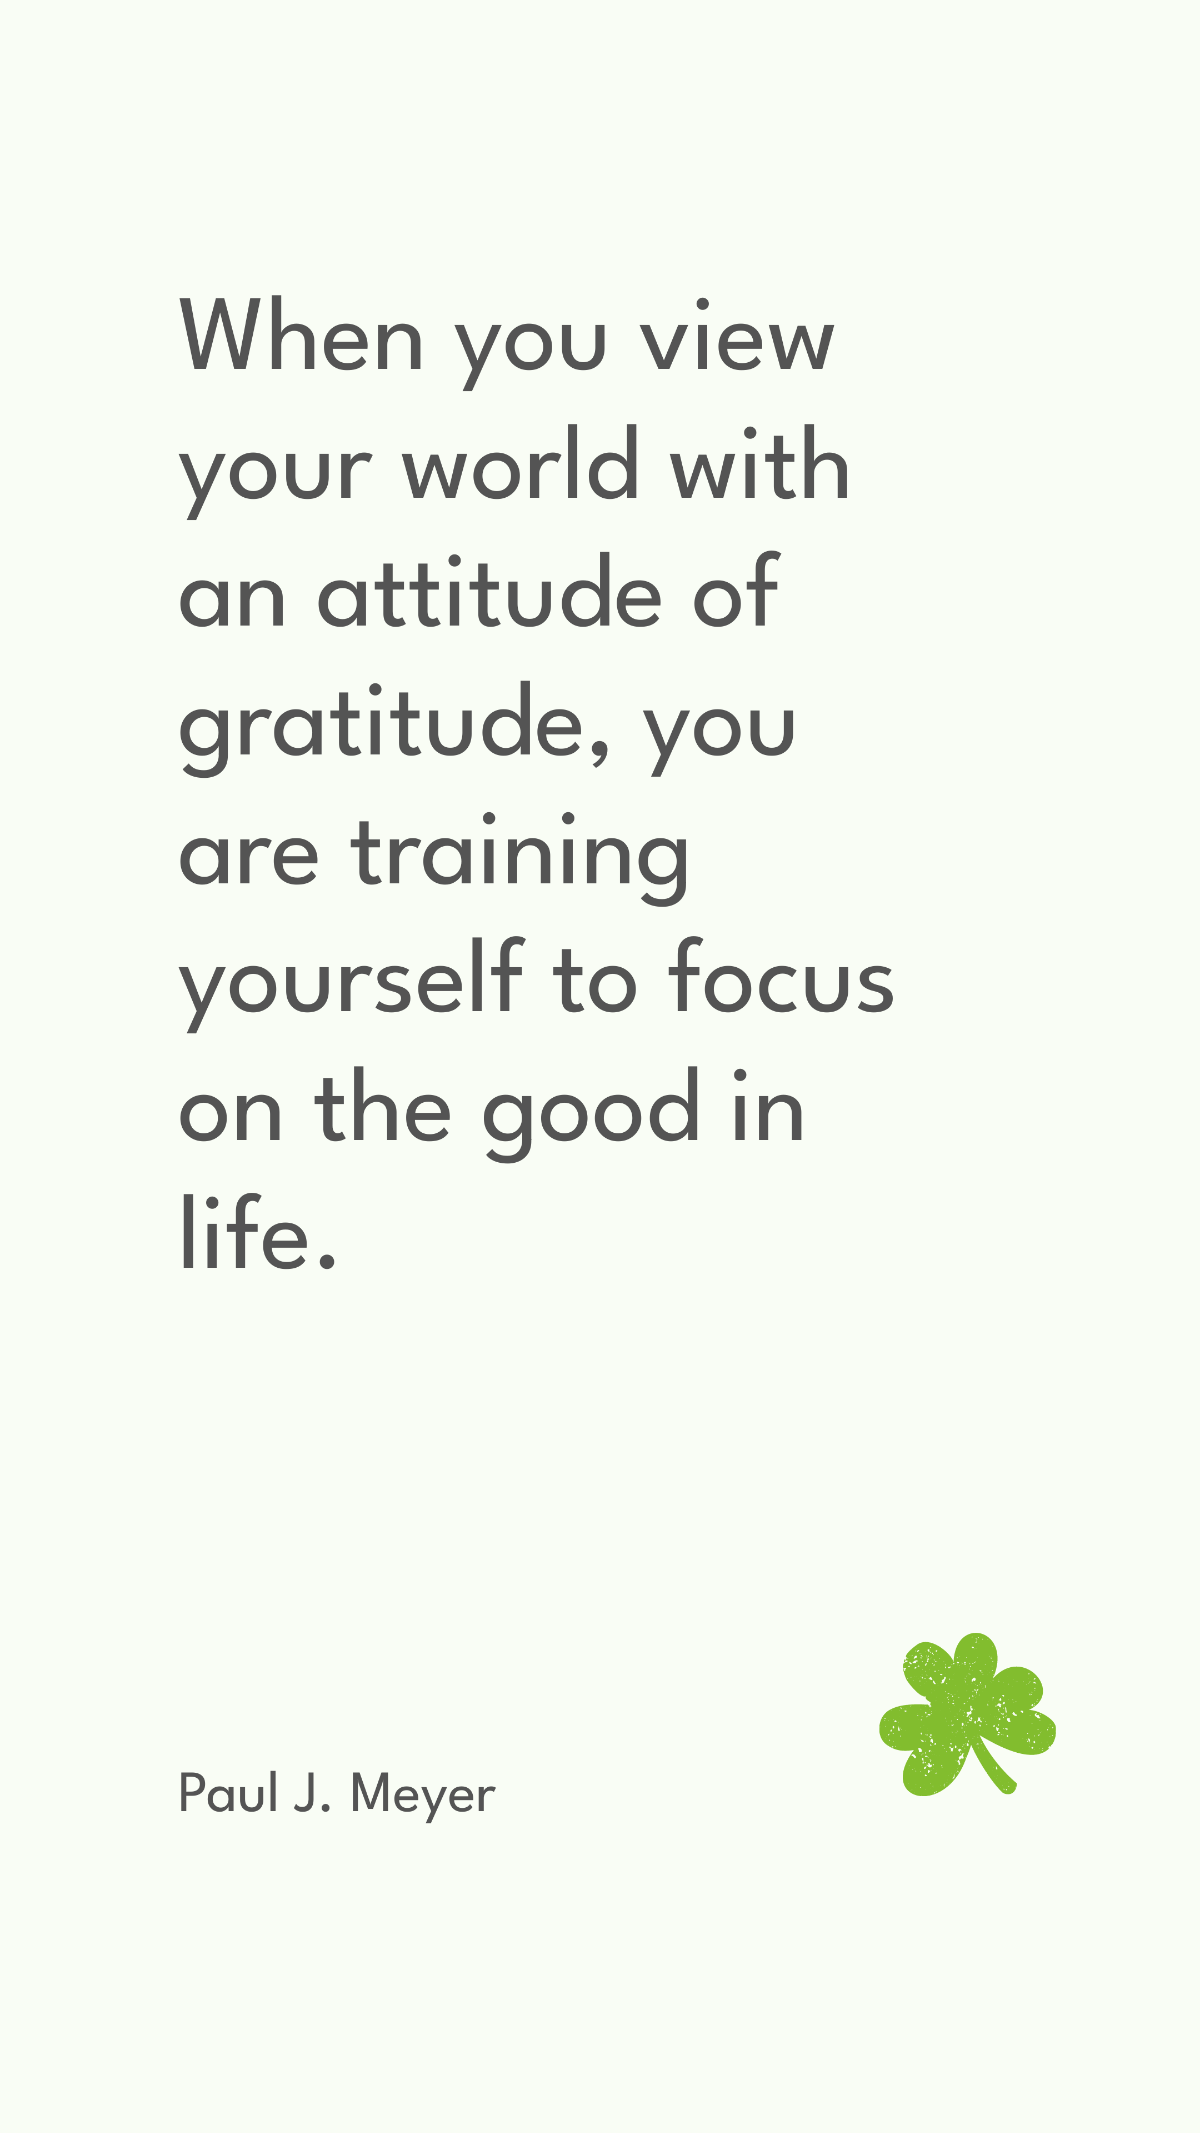 Free Paul J. Meyer - When you view your world with an attitude of gratitude, you are training yourself to focus on the good in life. Template